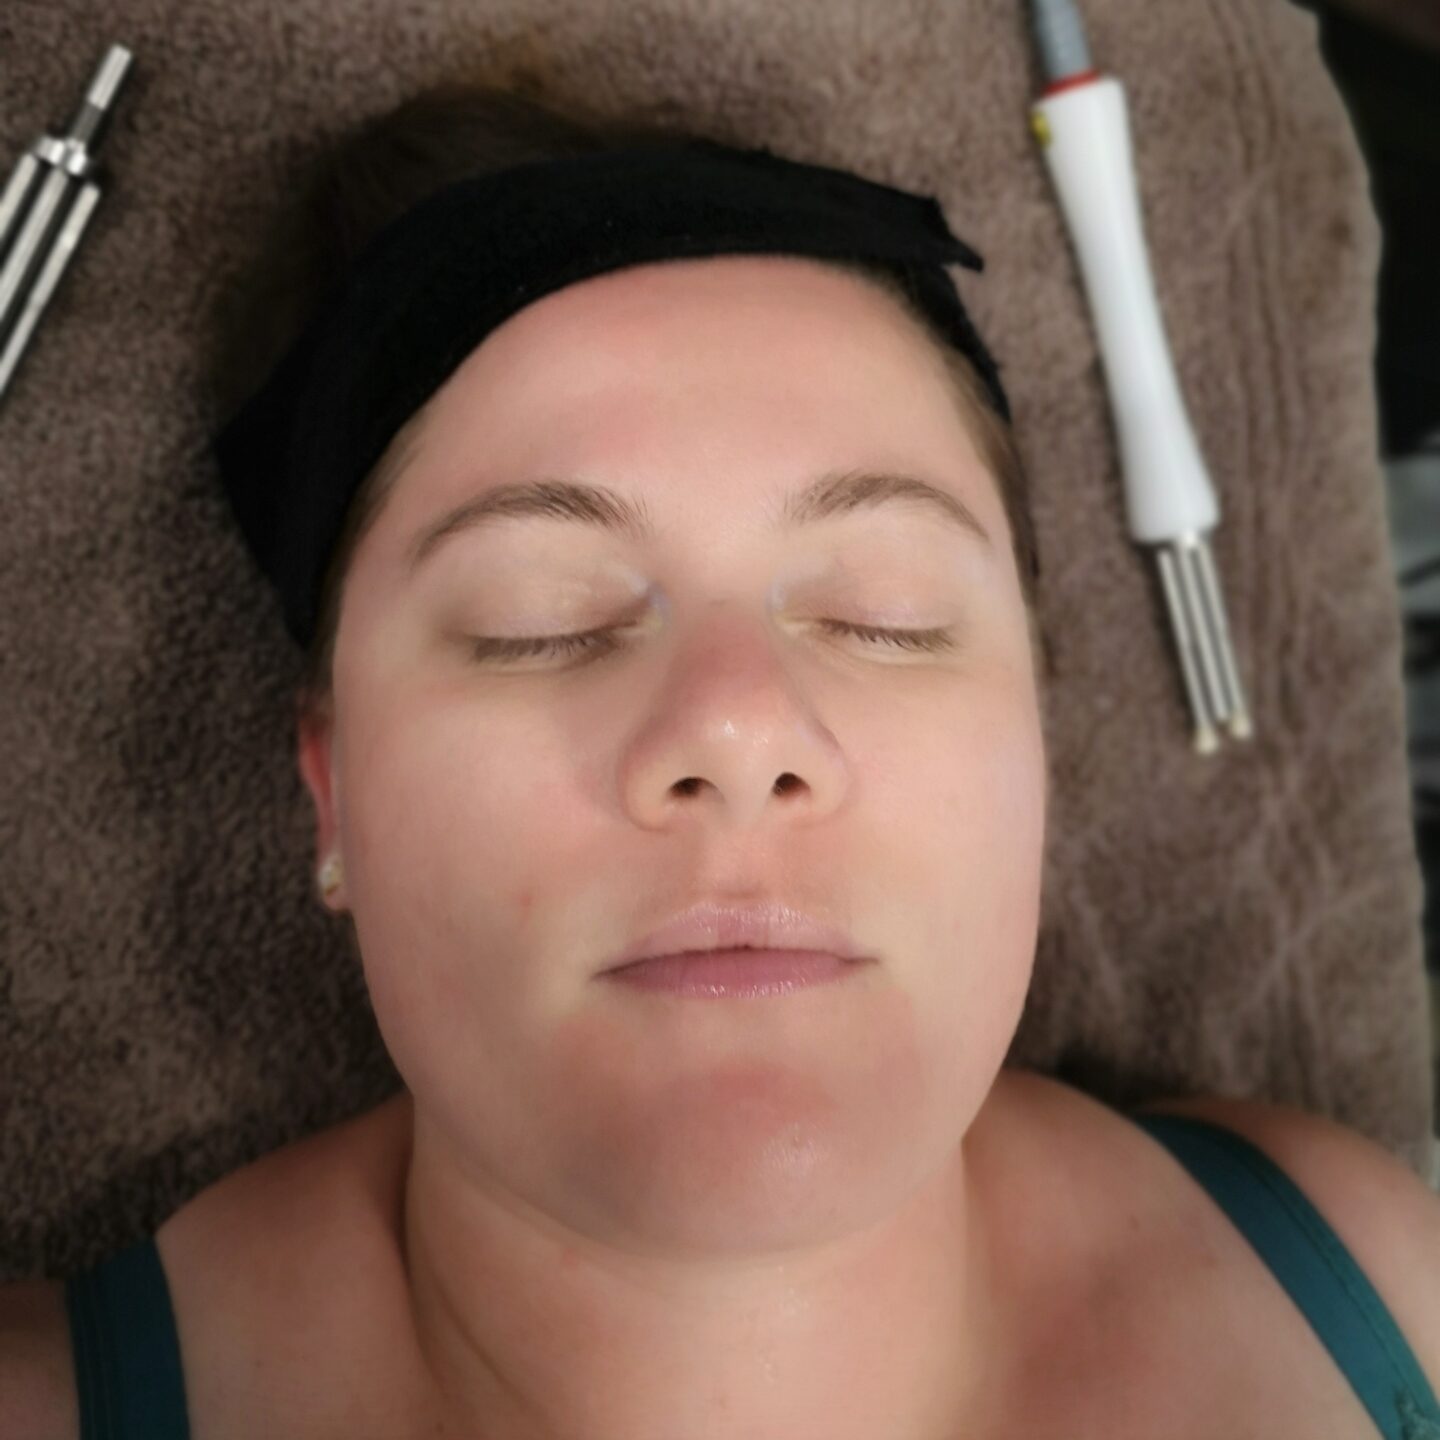 Skin & Beauty Clinic, Tenterden, Skin Clinic, Facial, Skin Health, Beauty Review, CACI Signature Non-Surgical Facial Toning, CACI Facial Treatment, Local Places, Kent Businesses, Skin Lift, Skin & Beauty Clinic Review, Facials Review, the Frenchie Mummy